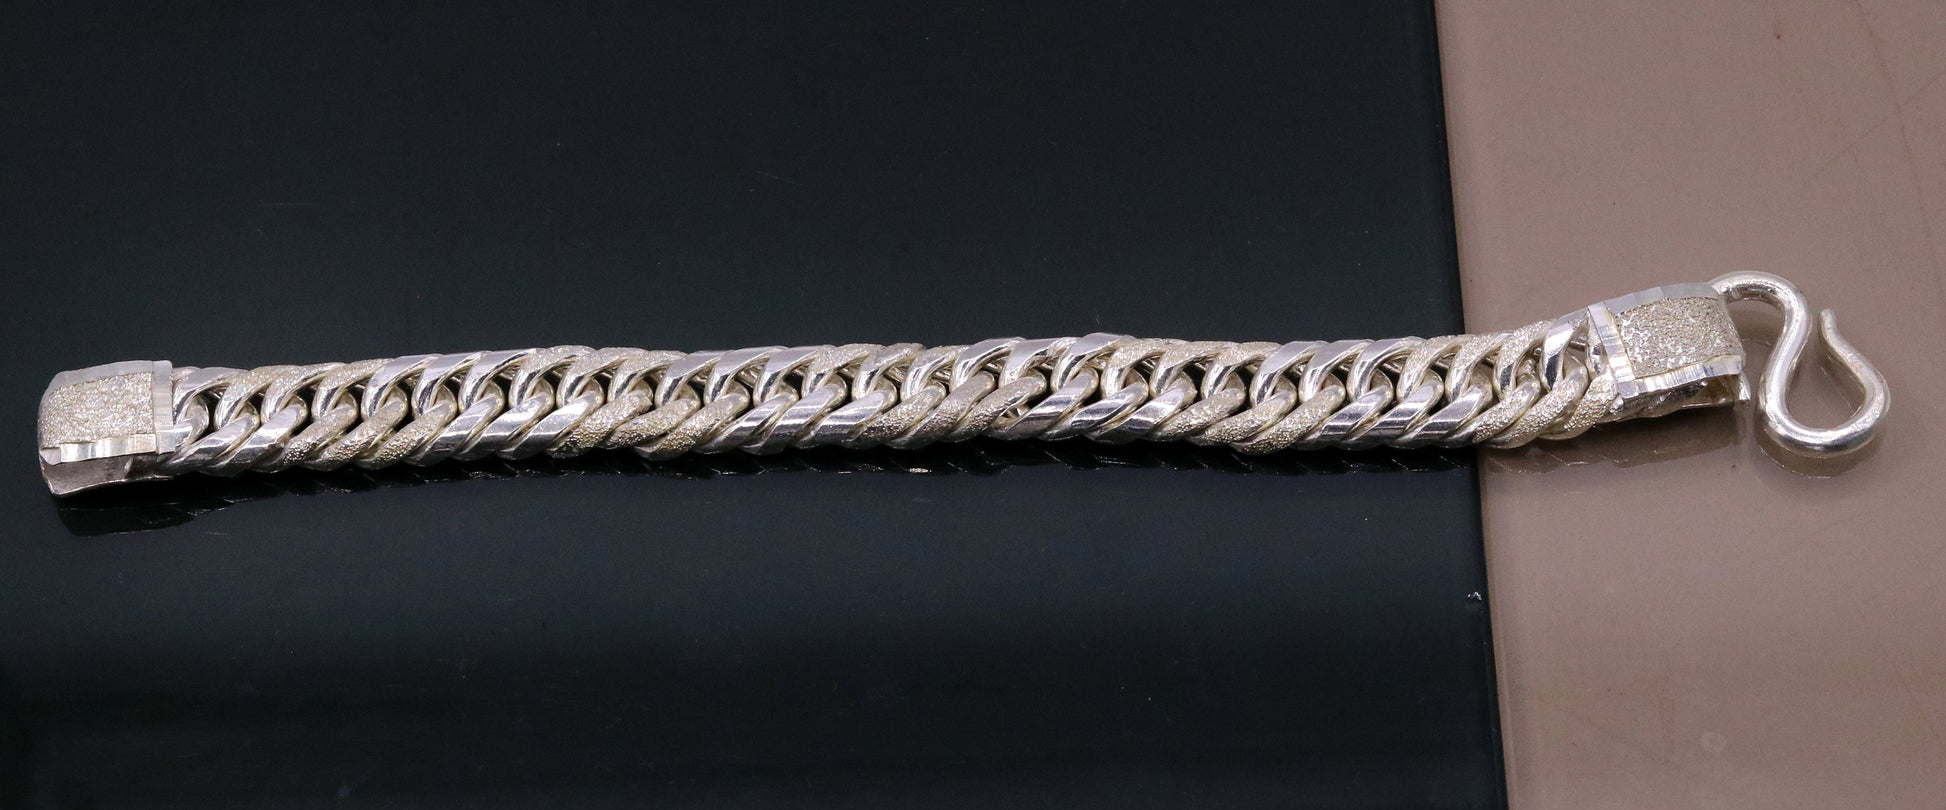 8" solid long Vintage antique cuban link chain 925 sterling silver bracelet, excellent unisex gifting custom made jewelry from india sbr151 - TRIBAL ORNAMENTS